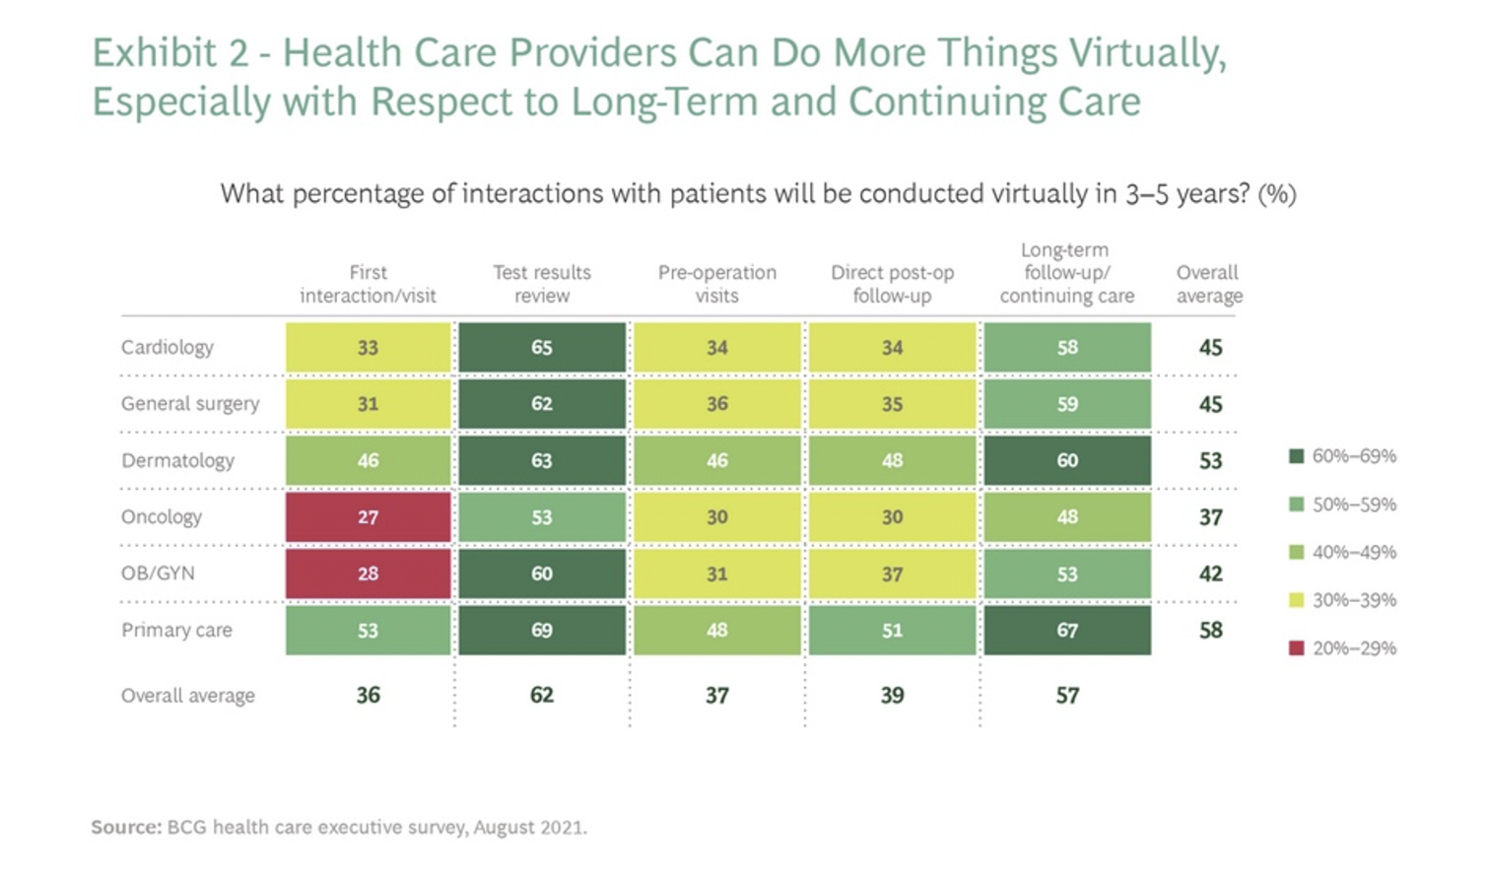 Percentage of patient interactions that will be conducted virtually in 3-5 years